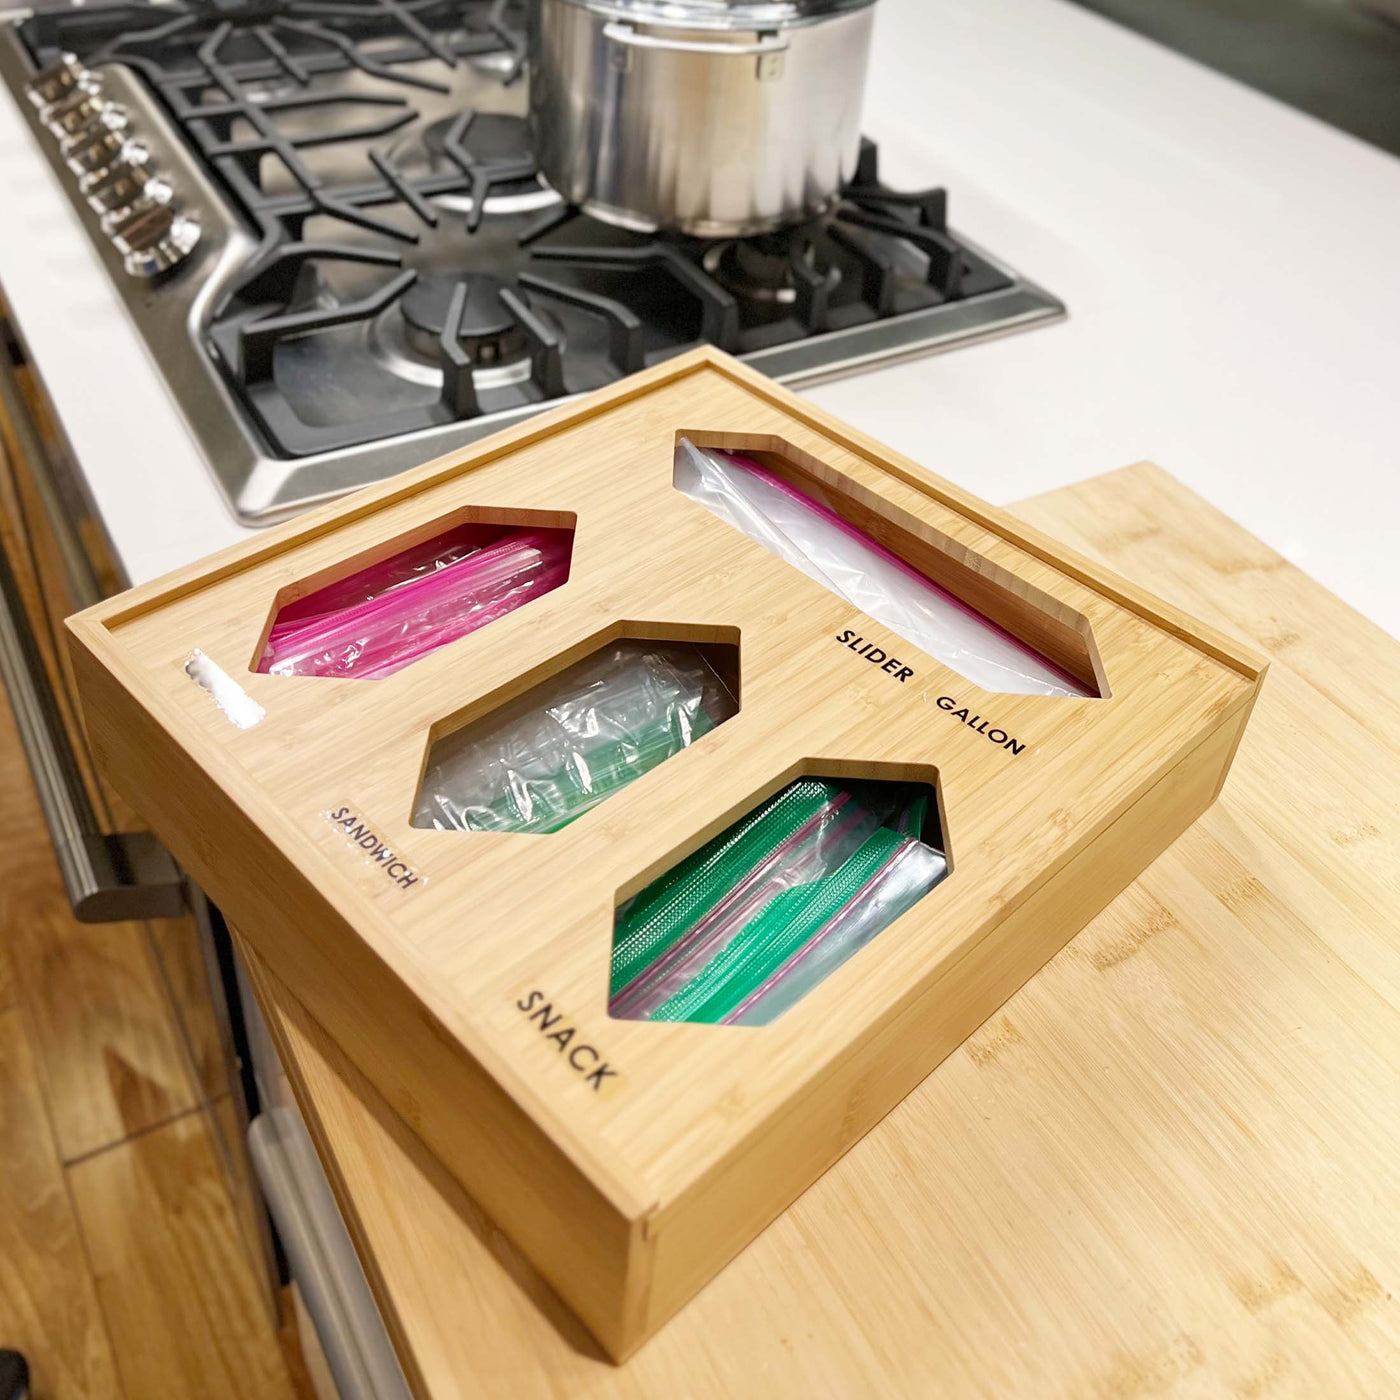 These Storage Bag Drawer Organizers Neatly Hold Your Ziploc Bags!